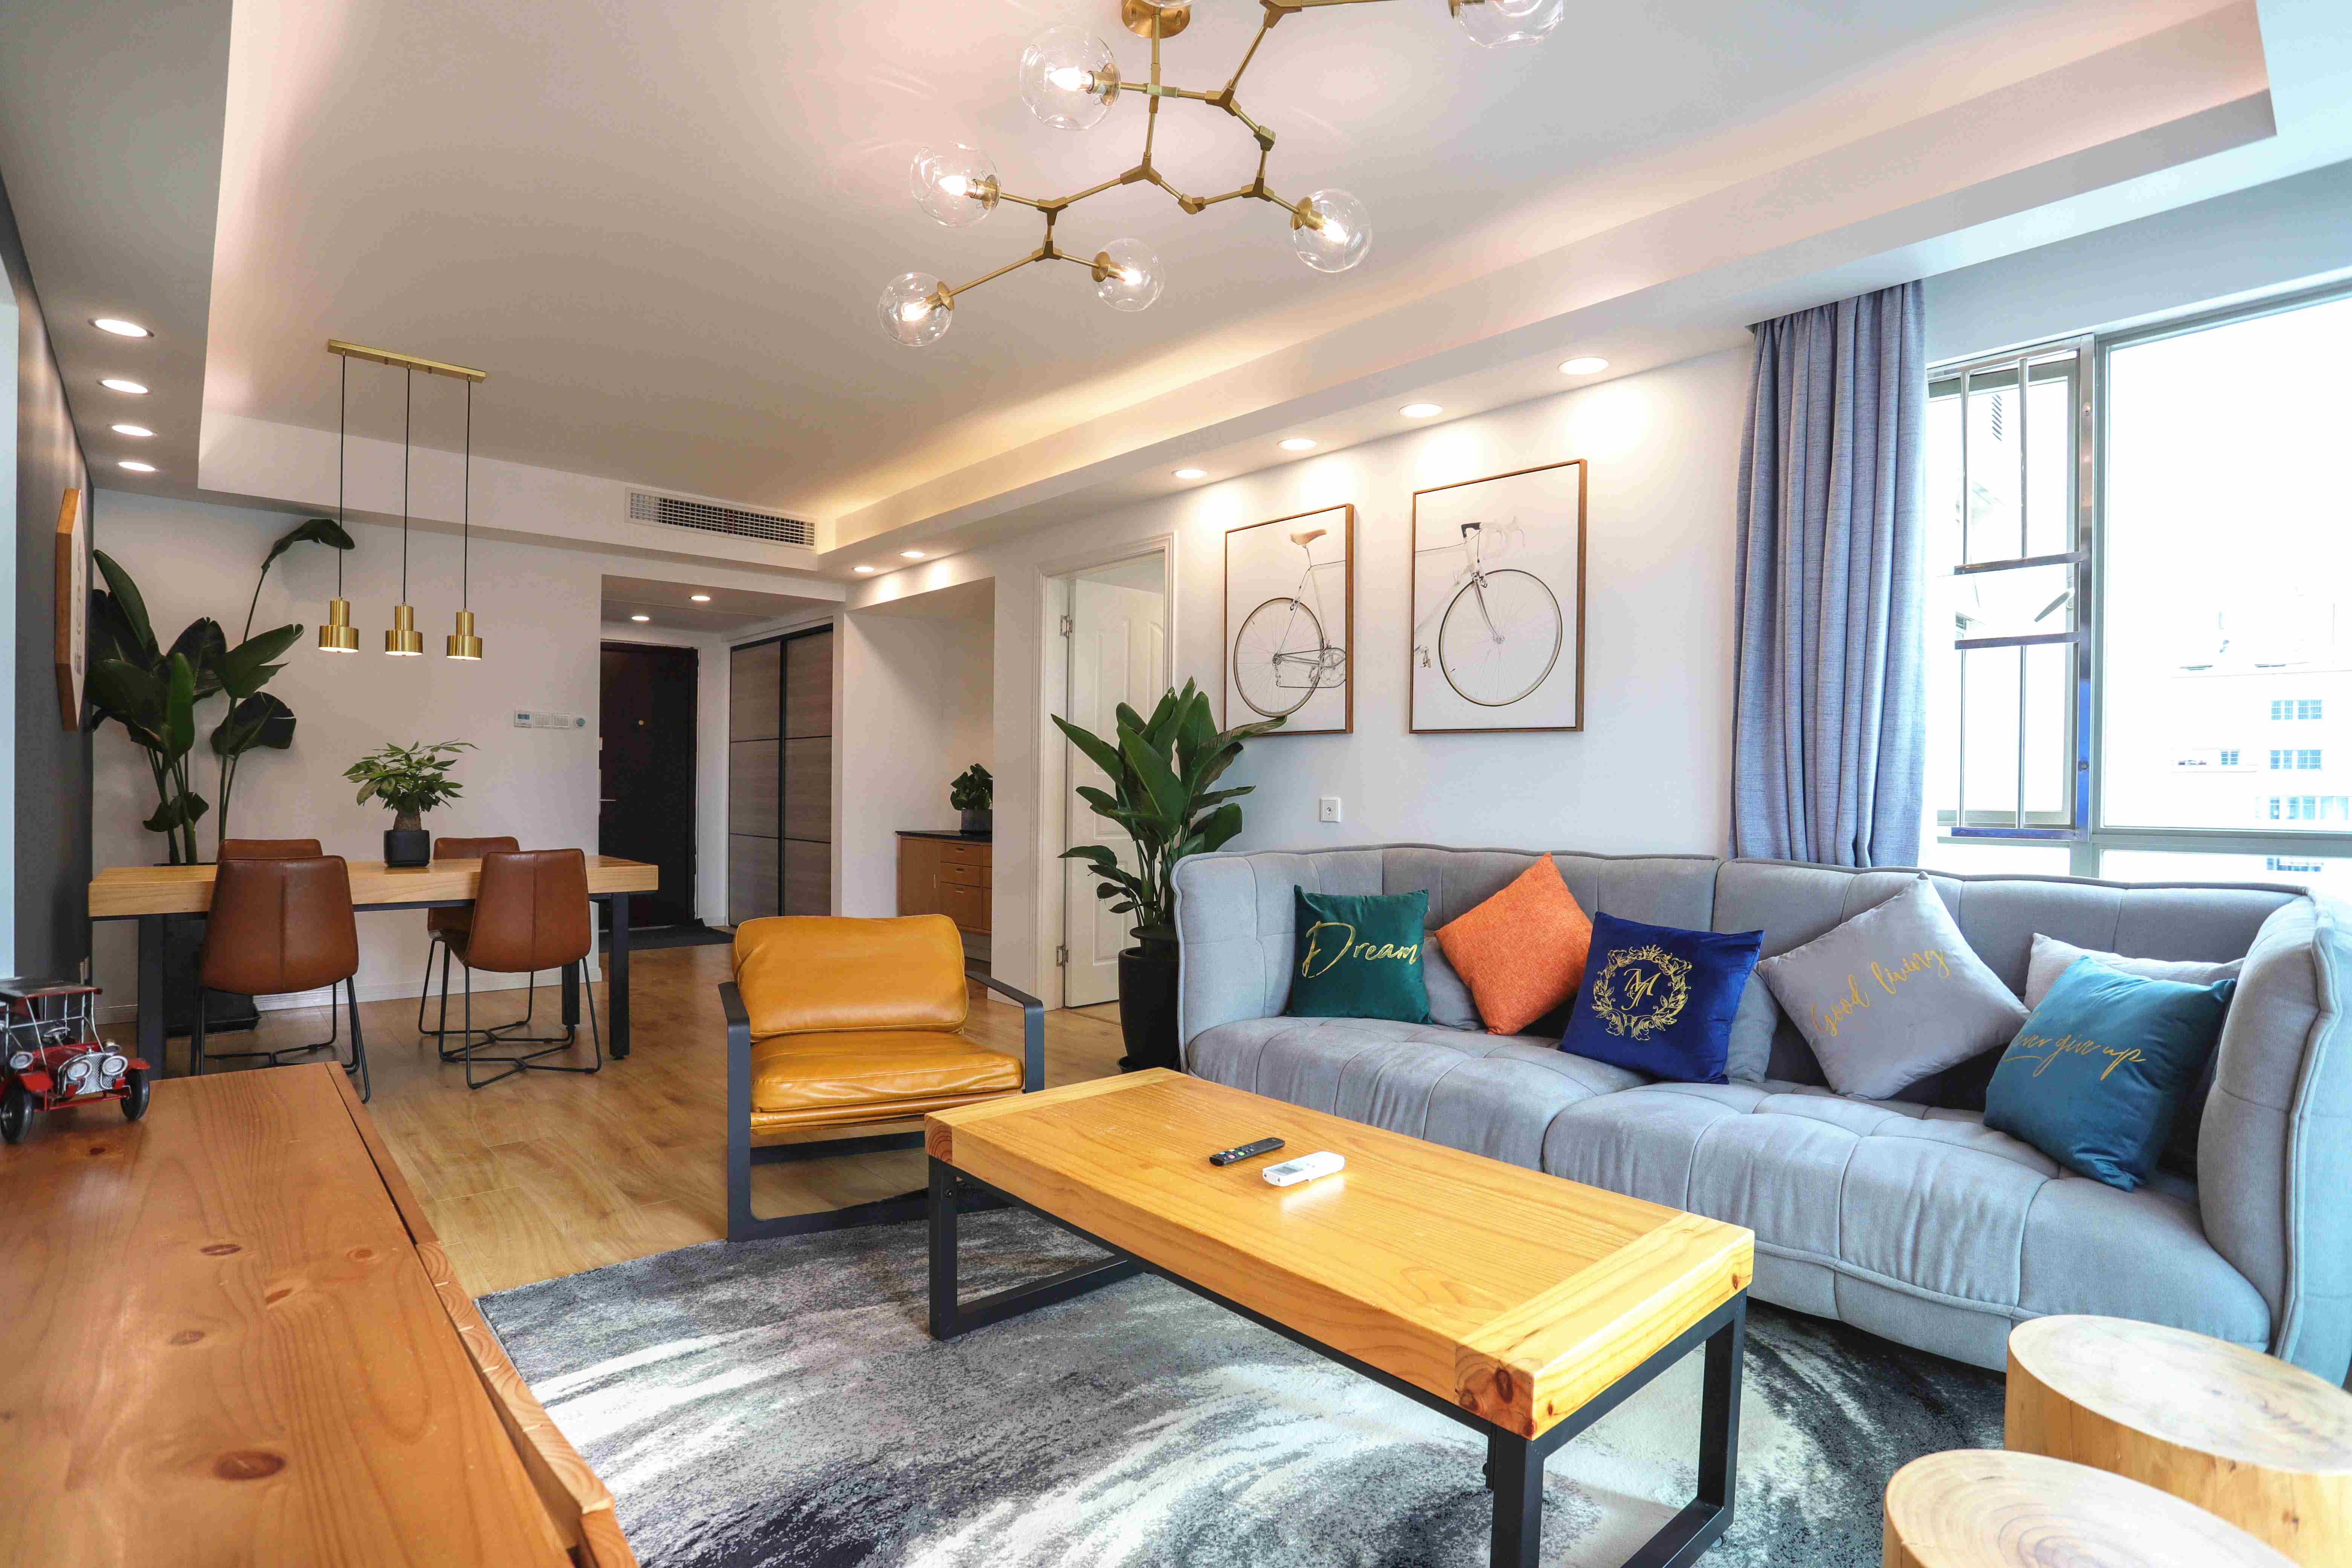 Open-design New Modern Bright Spacious 2BR One Park Ave Apt for Rent in Shanghai Jing’an Near LN 2/7